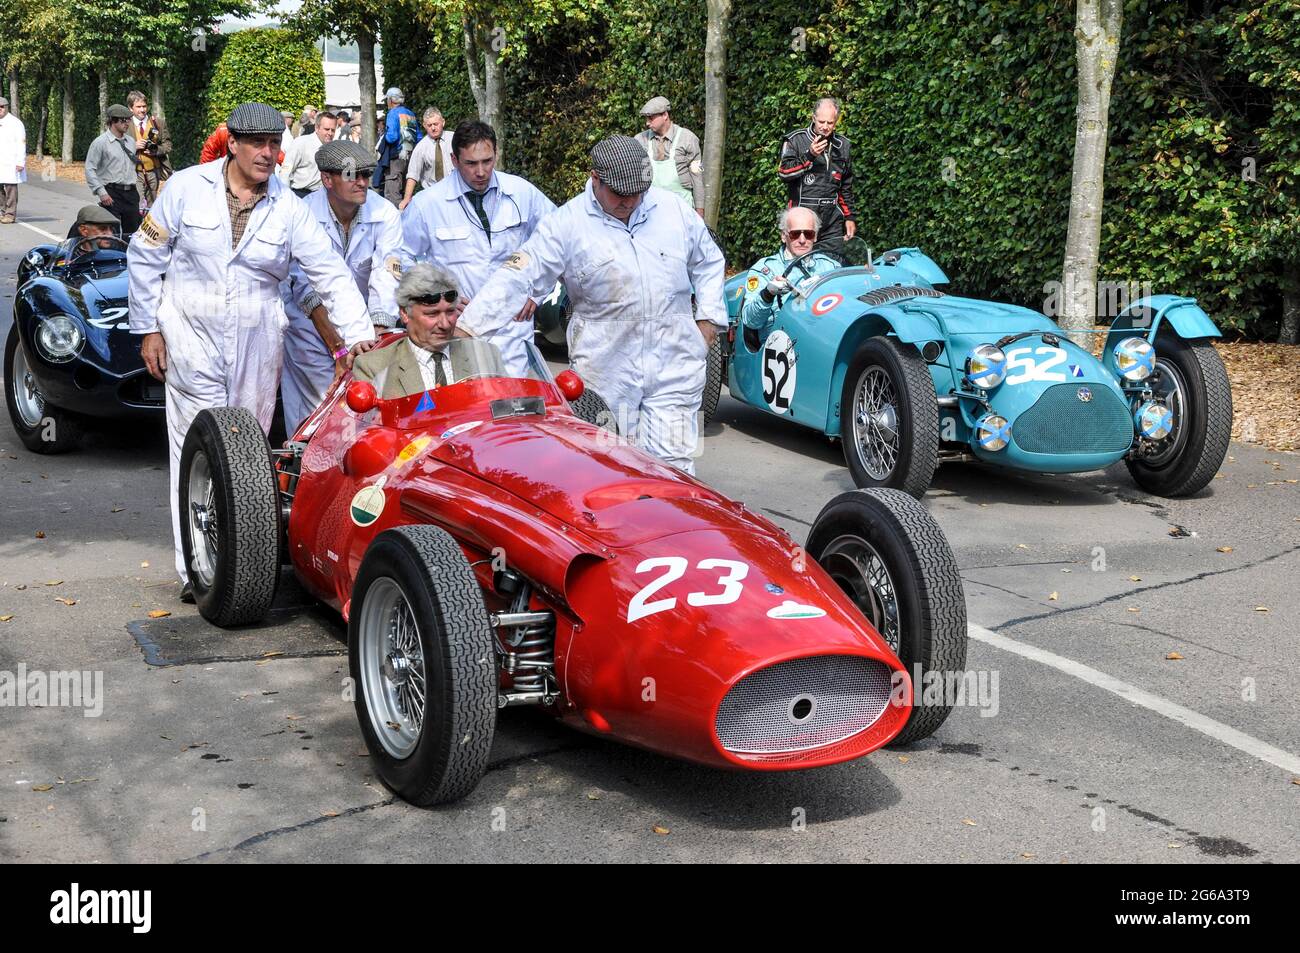 Maserati 250F of Willi Balz classic, vintage racing car pushing out for competing at the Goodwood Revival historic event, UK. Team crew support Stock Photo